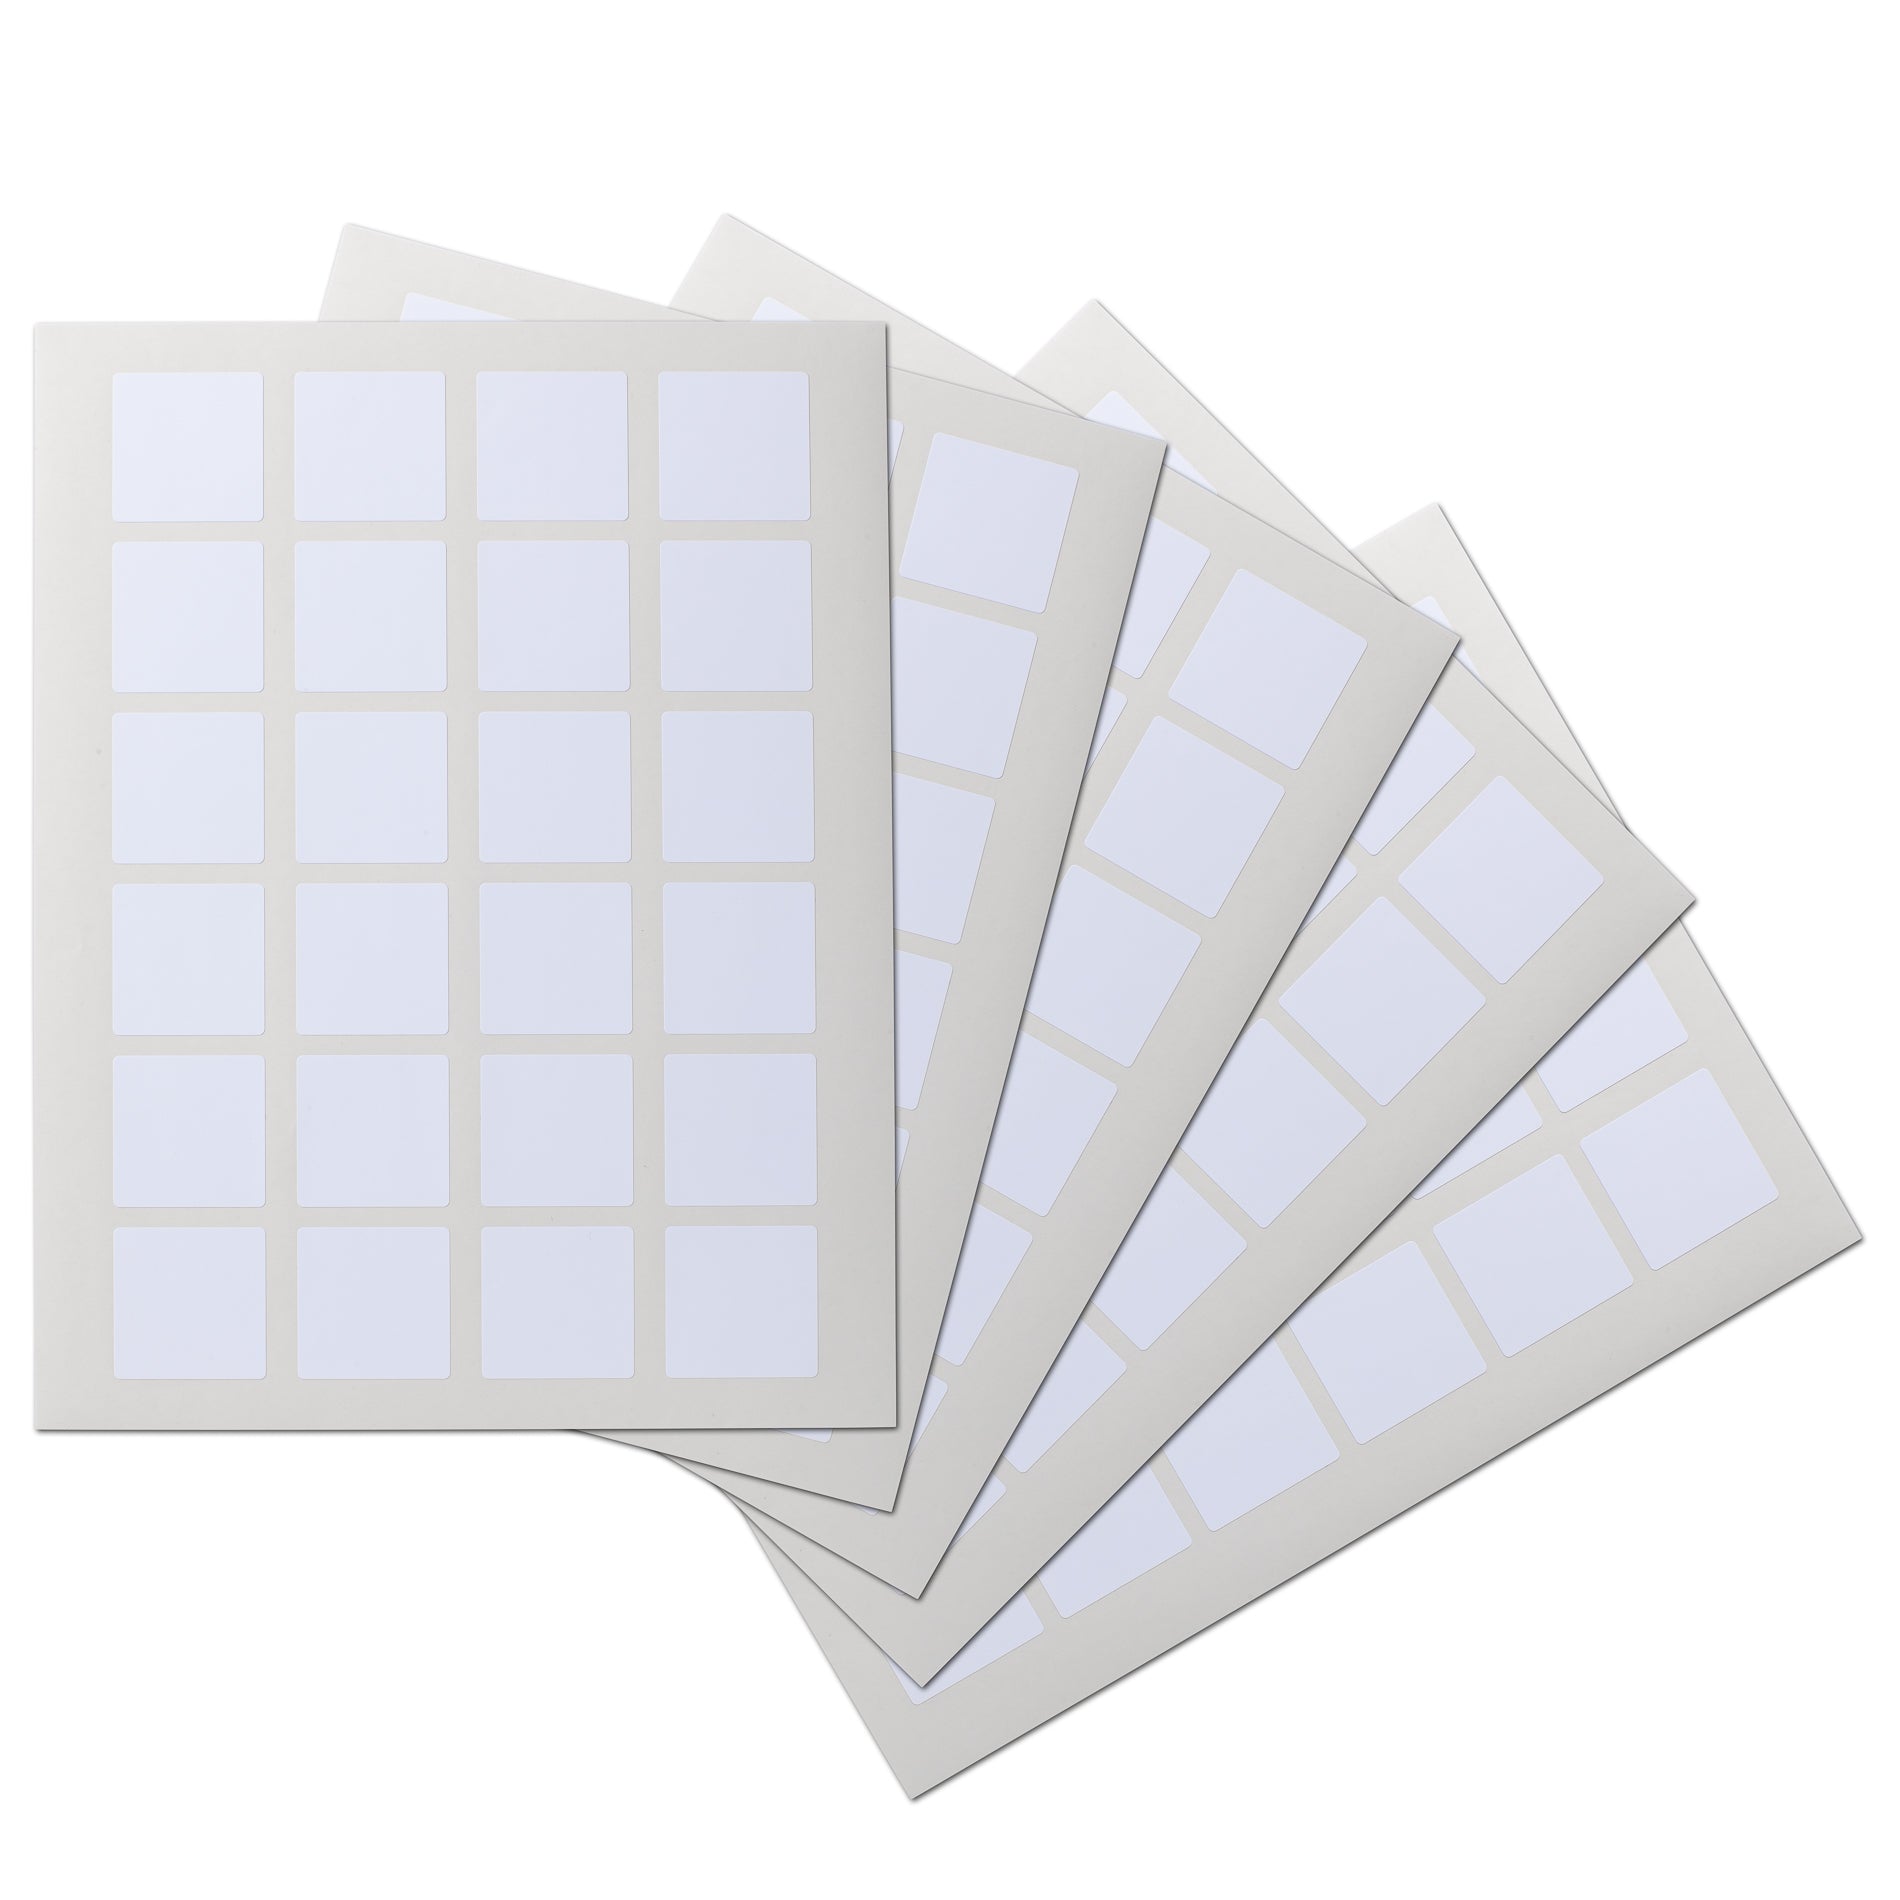 1.5 x 1.5 inch Square Waterproof Labels